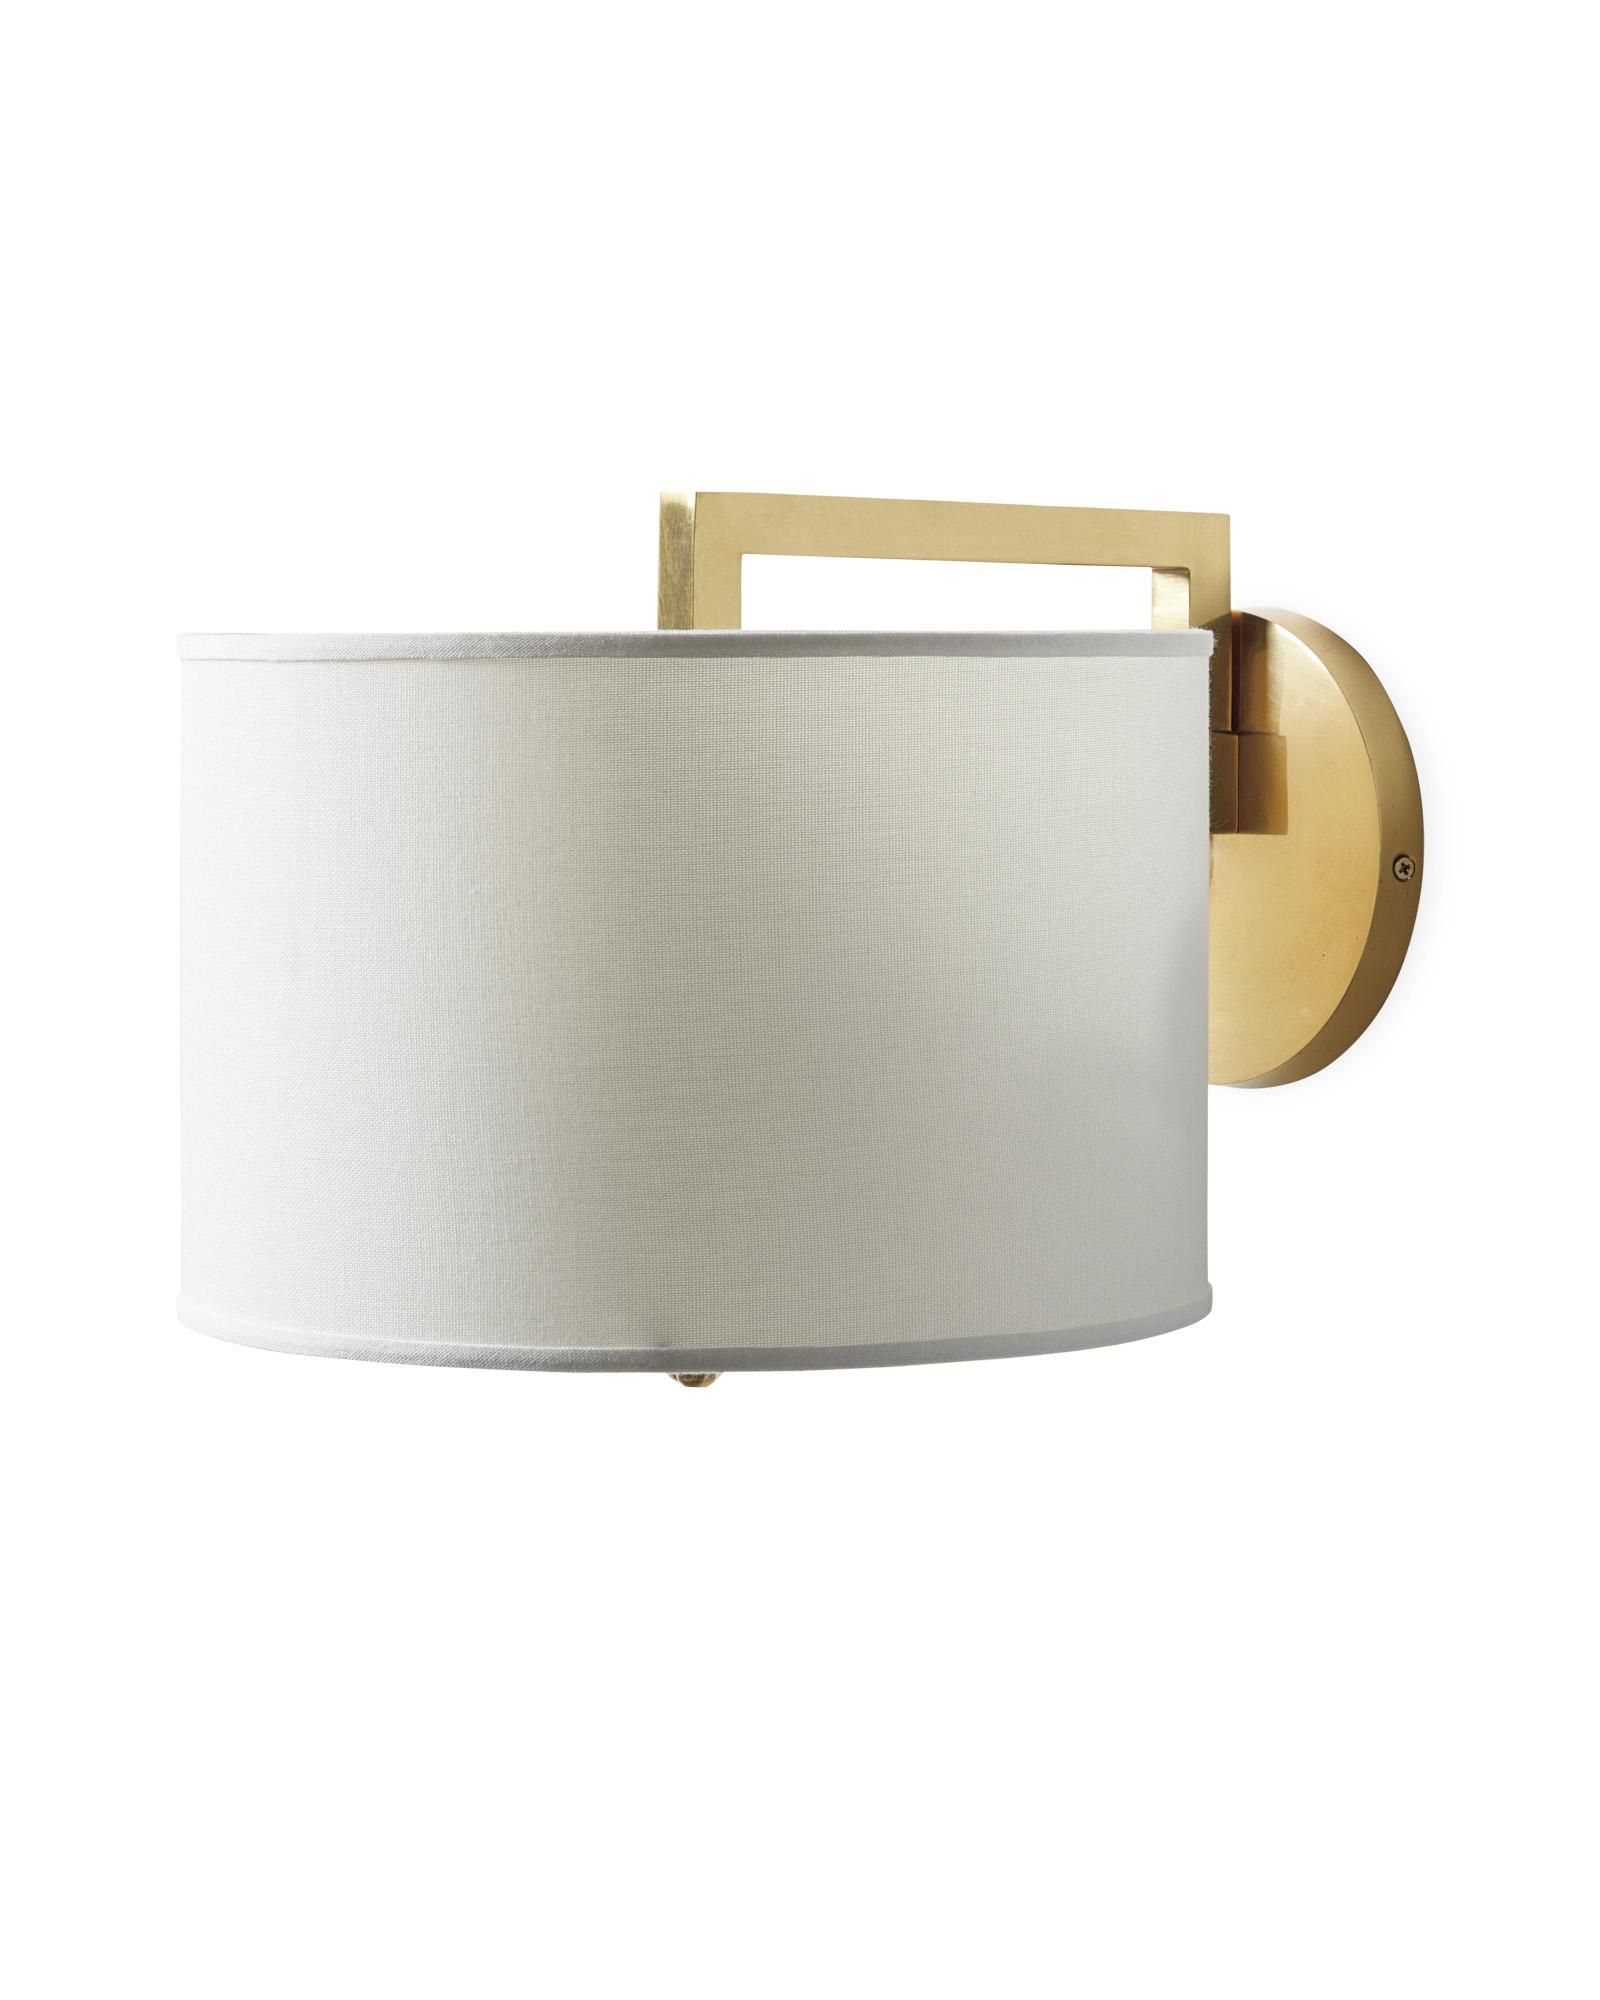 Soho Sconce | Serena and Lily